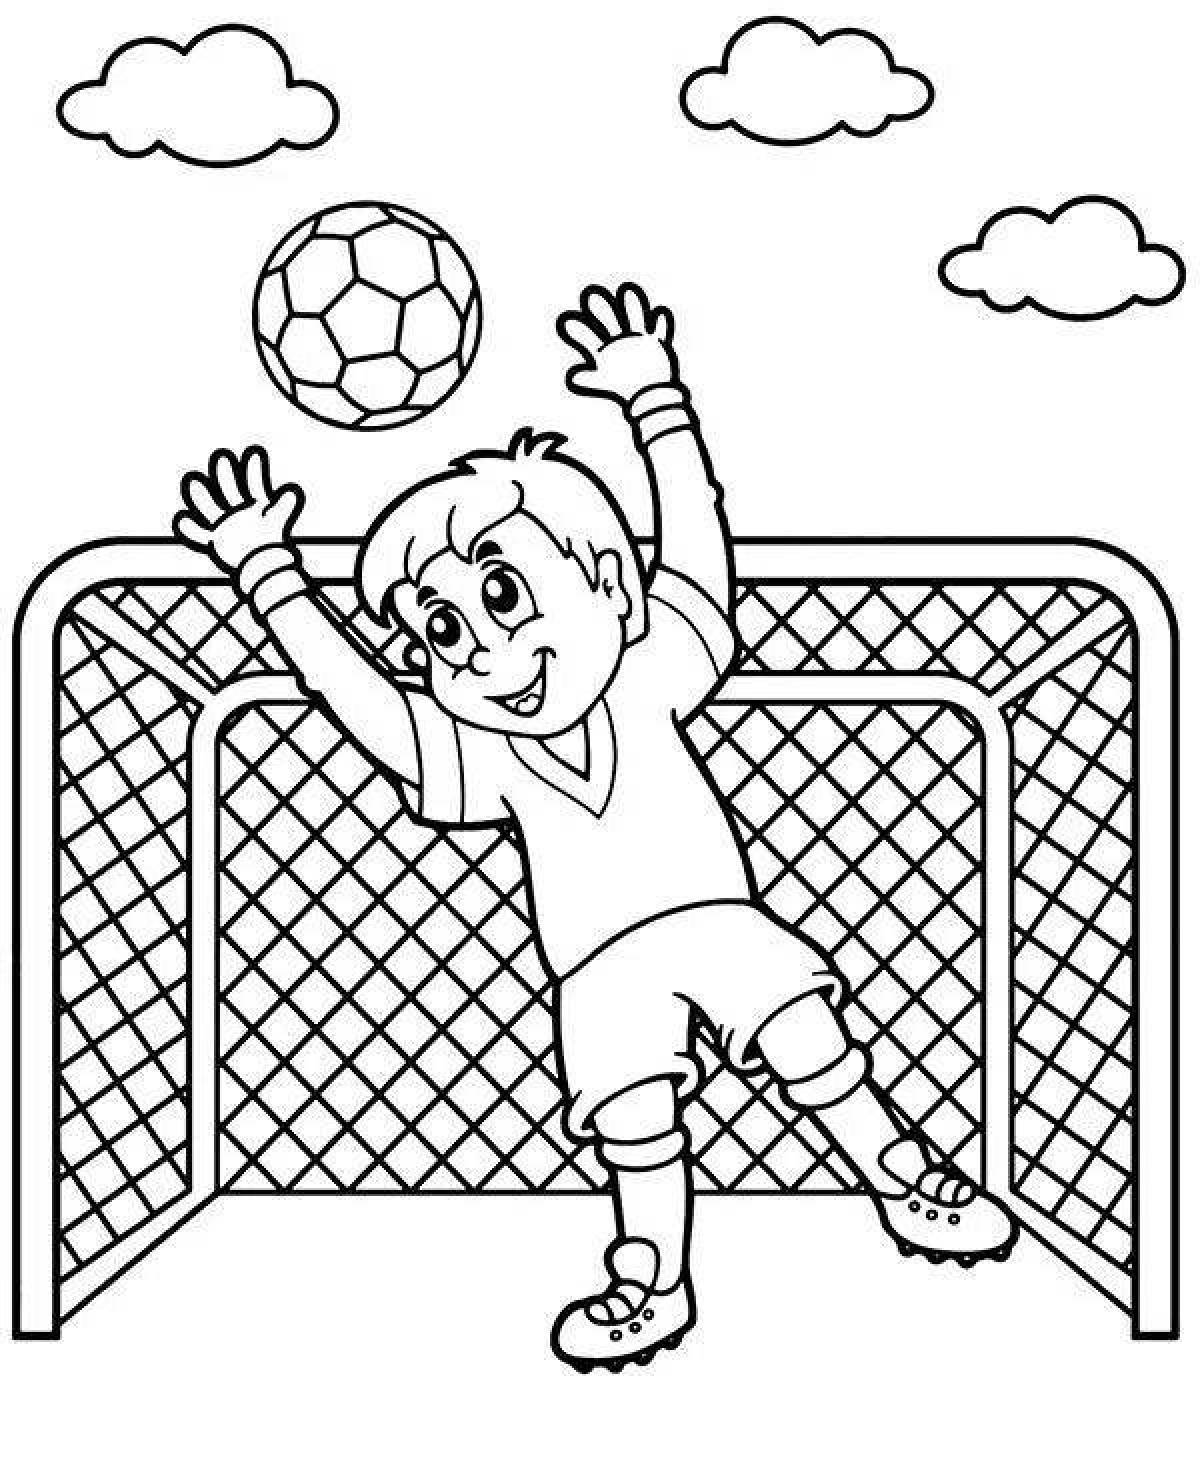 Colorful football coloring book